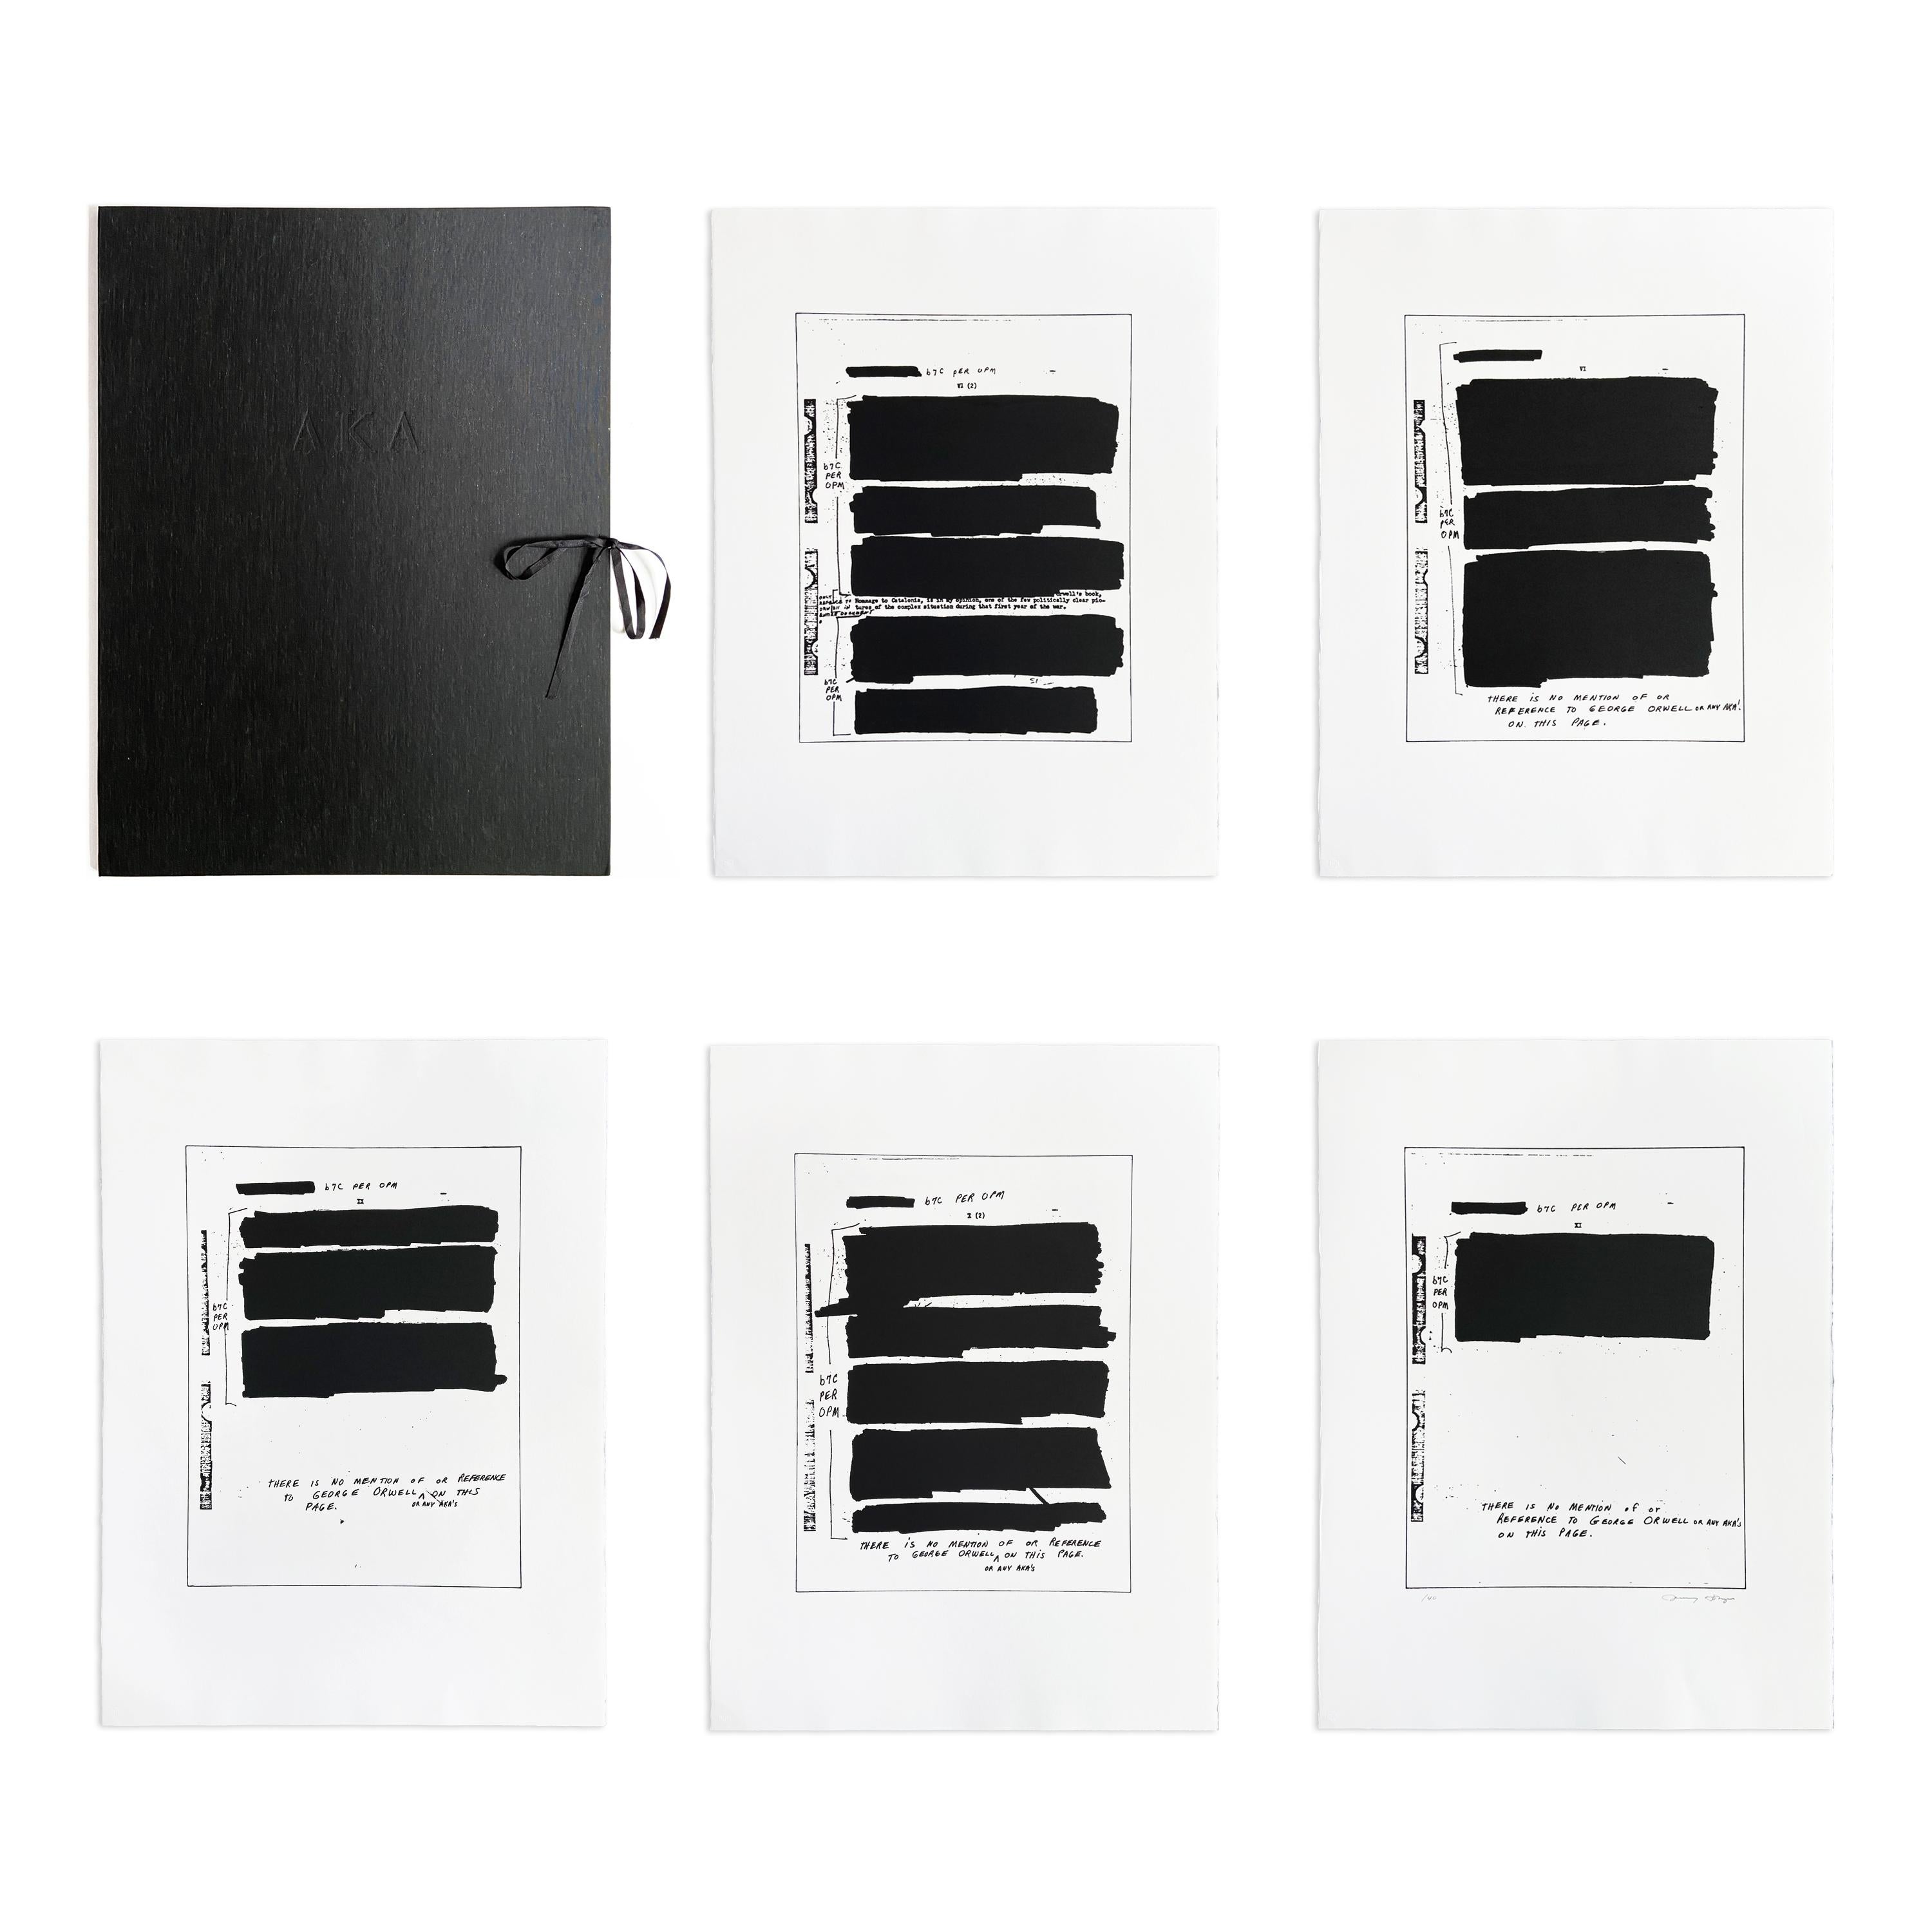 Jenny Holzer (American, b. 1950)
AKA, 2006
Medium: Set of five etchings, on Magnani Pescia paper (with title page, sheets loose, in original black silk-covered portfolio case)
Dimensions: 75.6 x 56.3 cm (29 3/4 x 22 1/8 in)
Edition of 40: